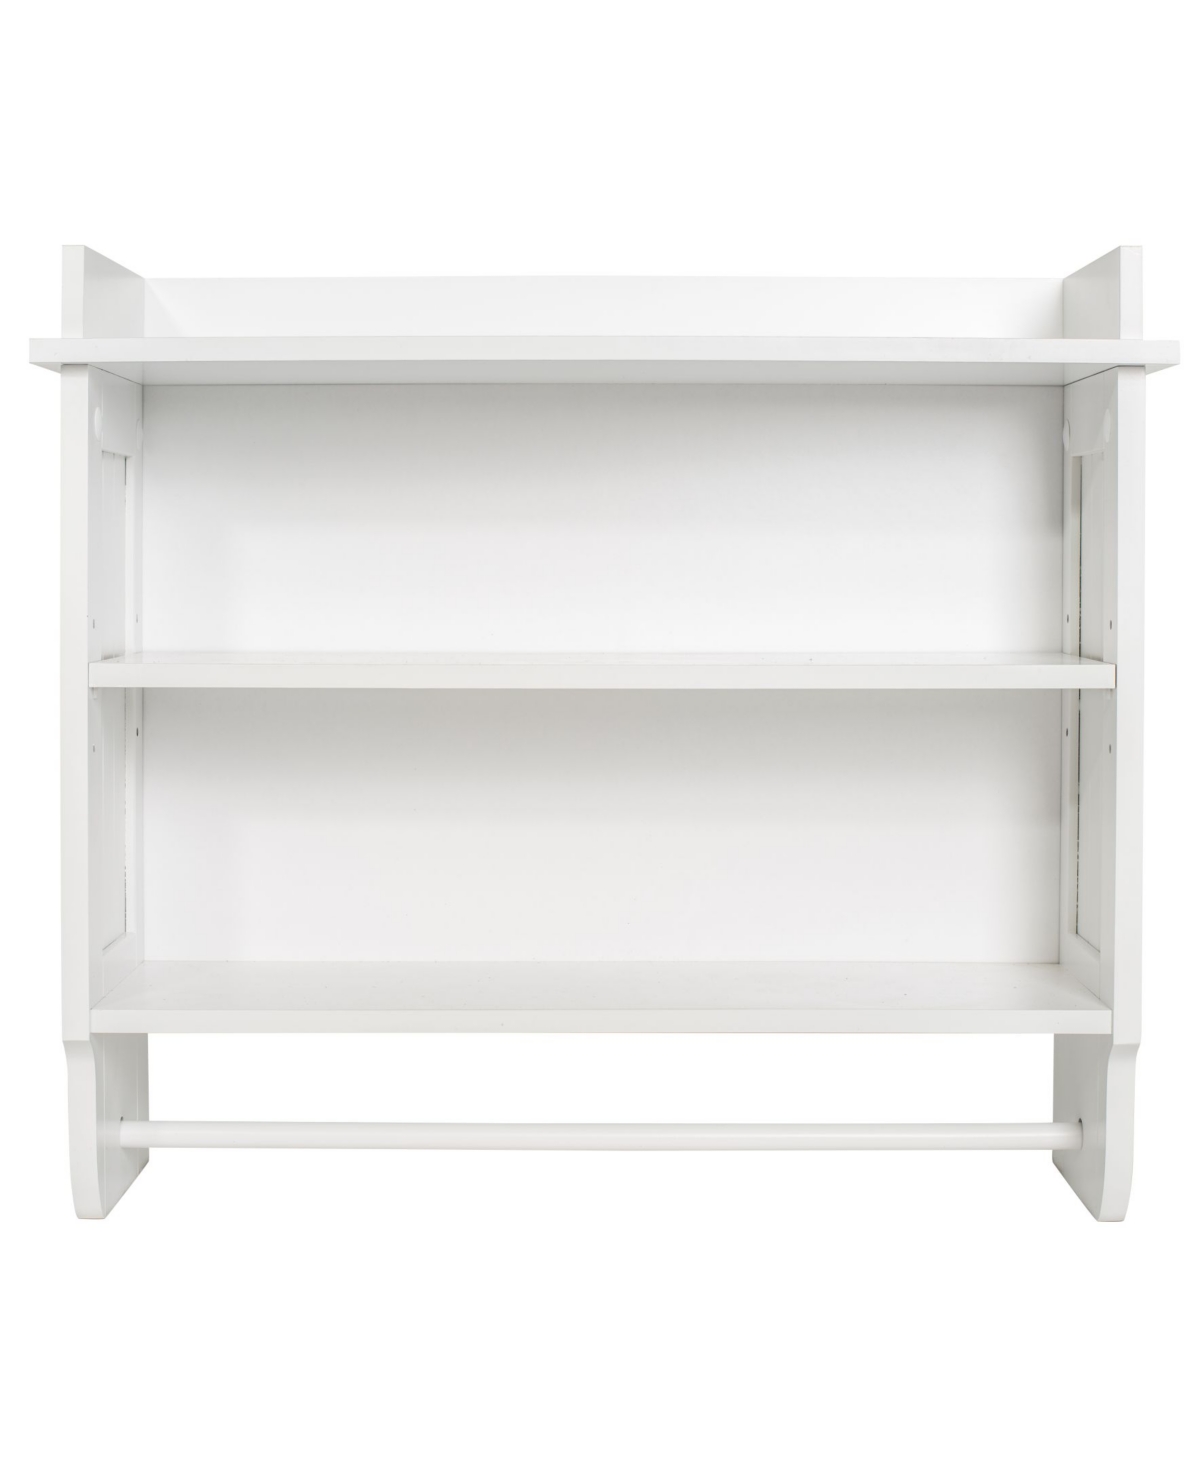 Redmon Contemporary Country Wall Shelf with Towel Bar Bedding